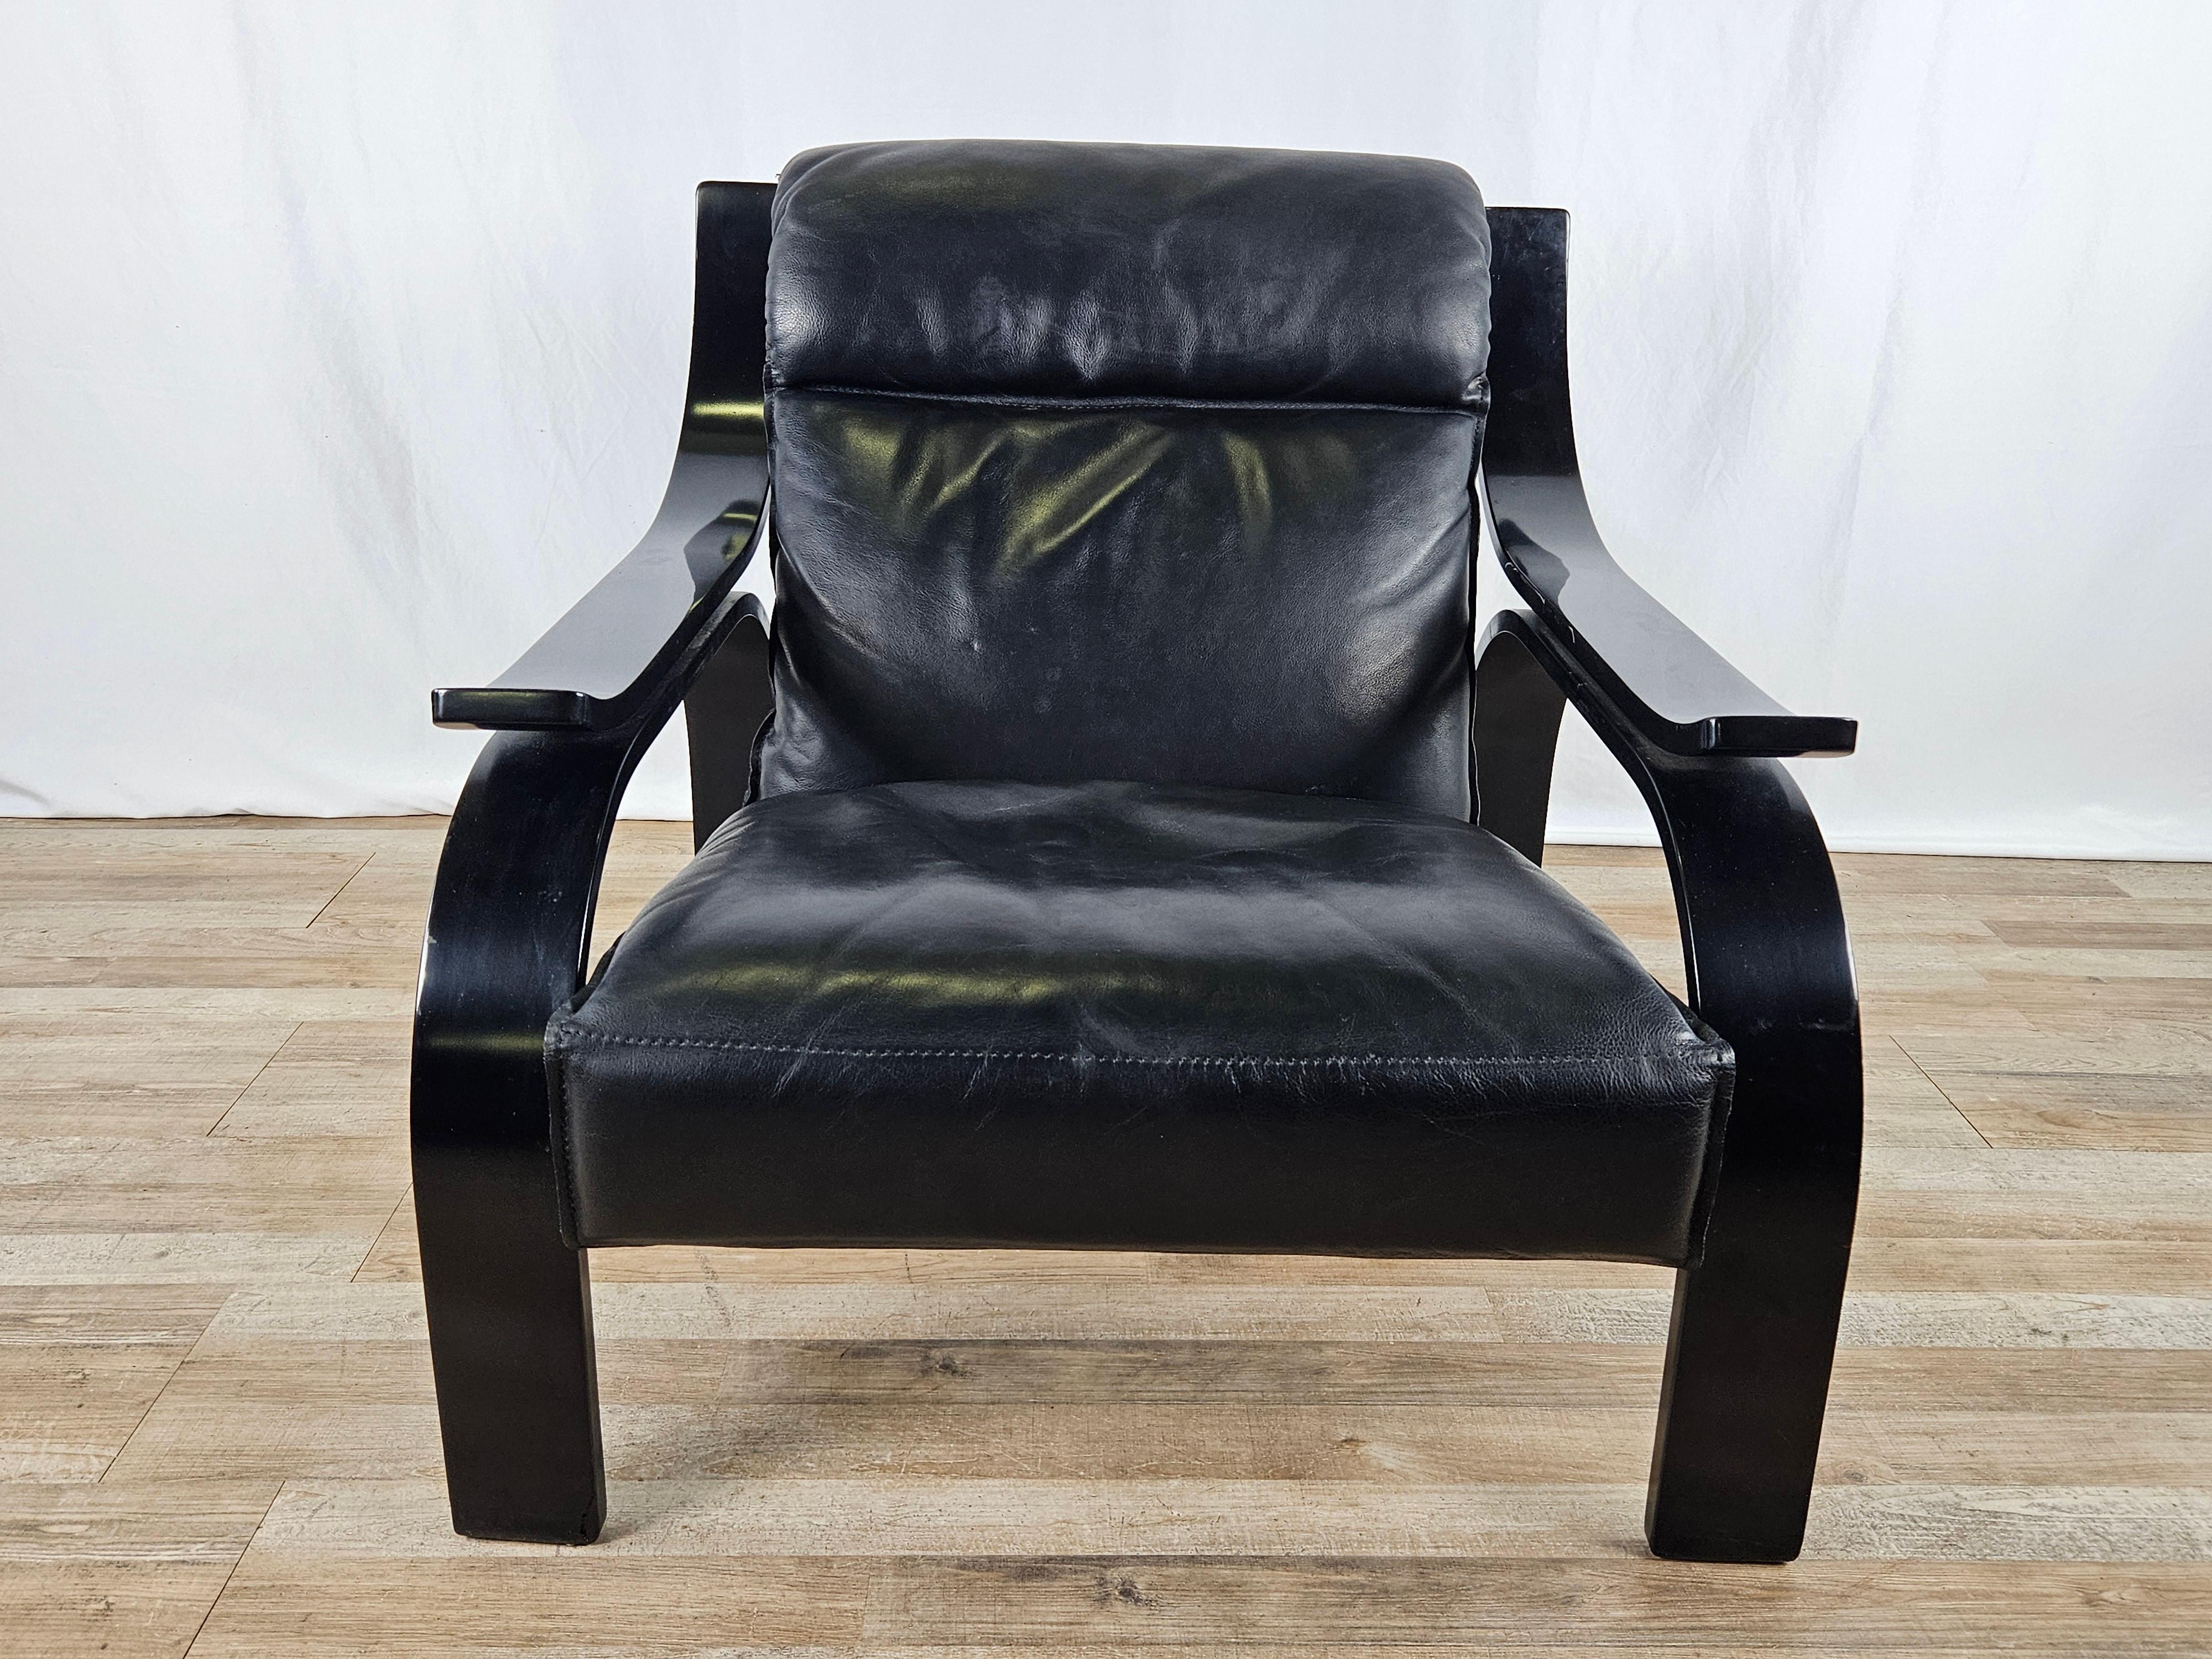 An icon of 1960s Italian design, this Woodline armchair was designed by Marco Zanuso for Arflex in 1964 and constructed of black lacquered plywood and a seat upholstered in high-quality black leather.

Elegant design accentuated by soft and light